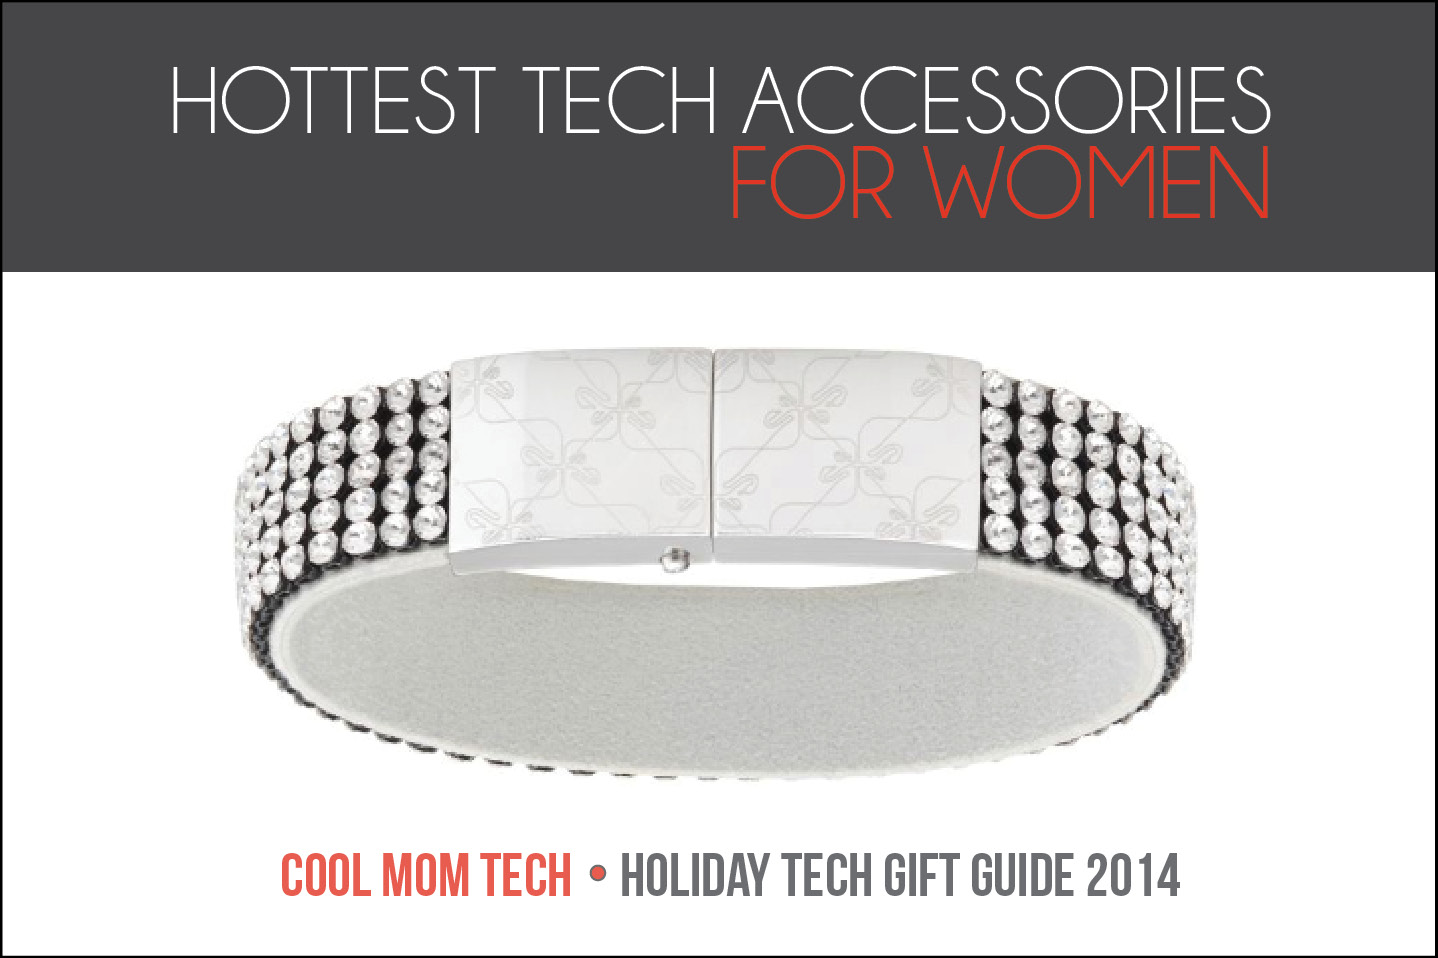 12 stylish tech gifts for gadget lovers with great taste: Holiday Tech Gifts 2014